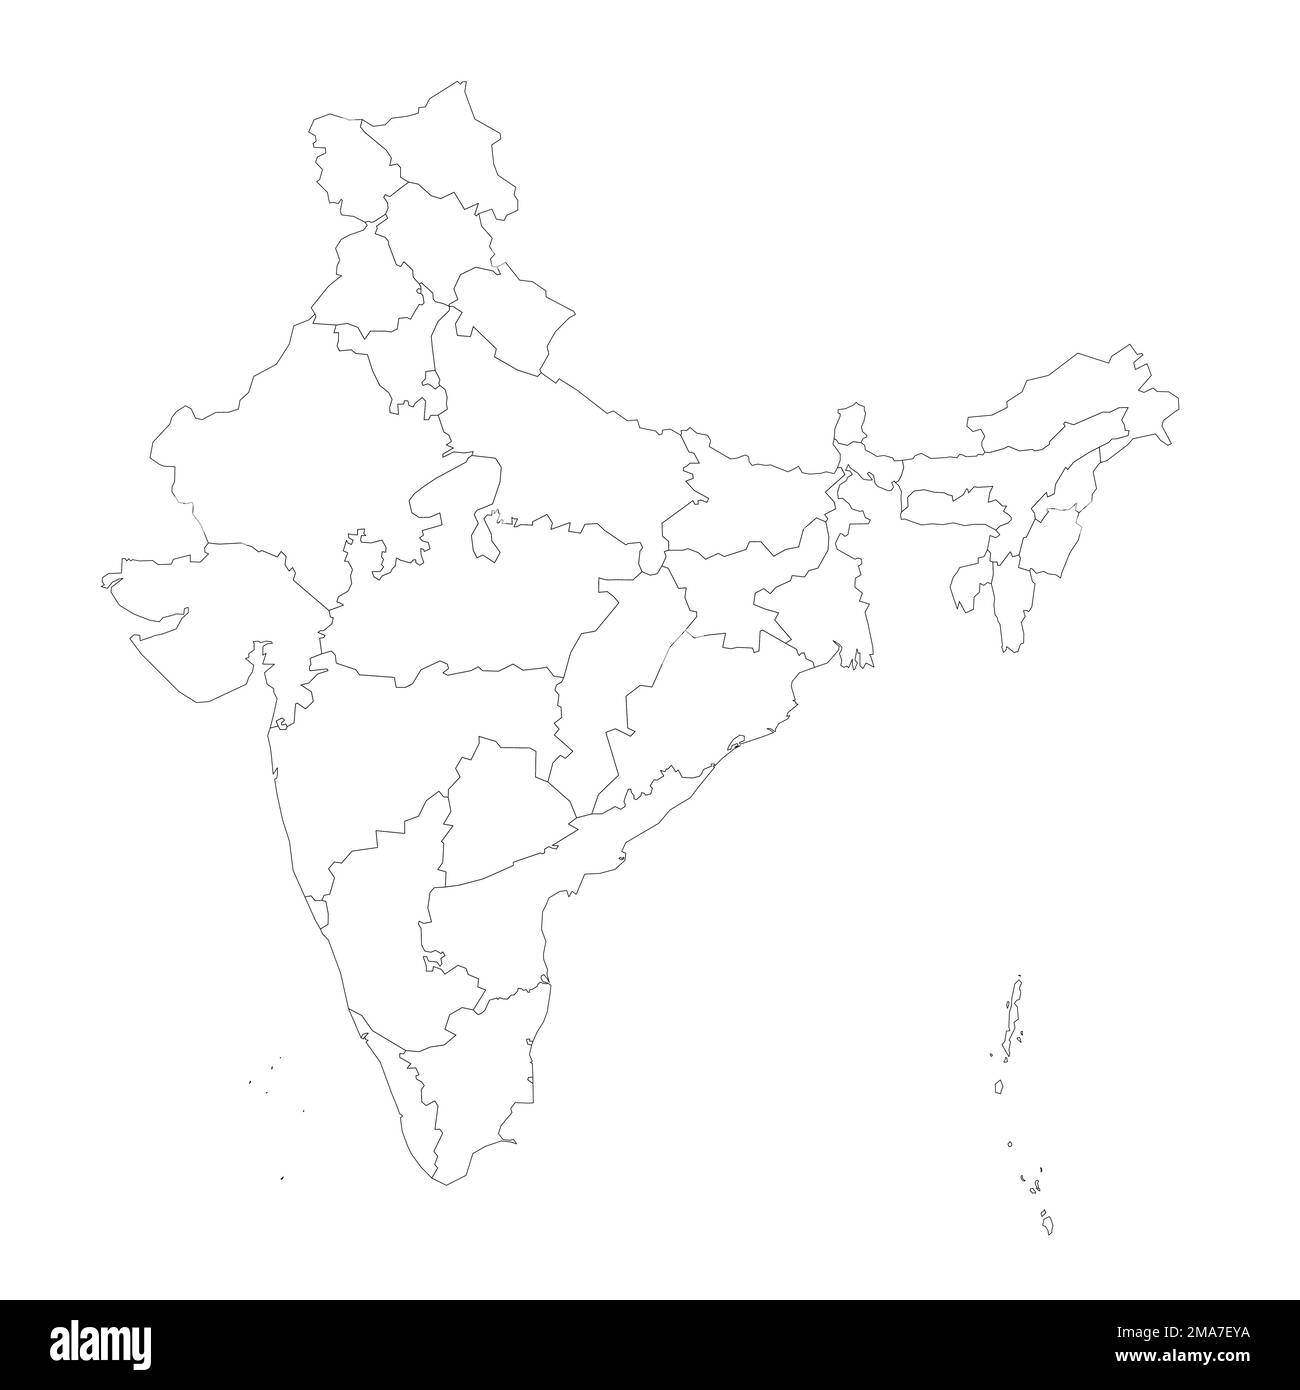 India political map of administrative divisions Stock Vector